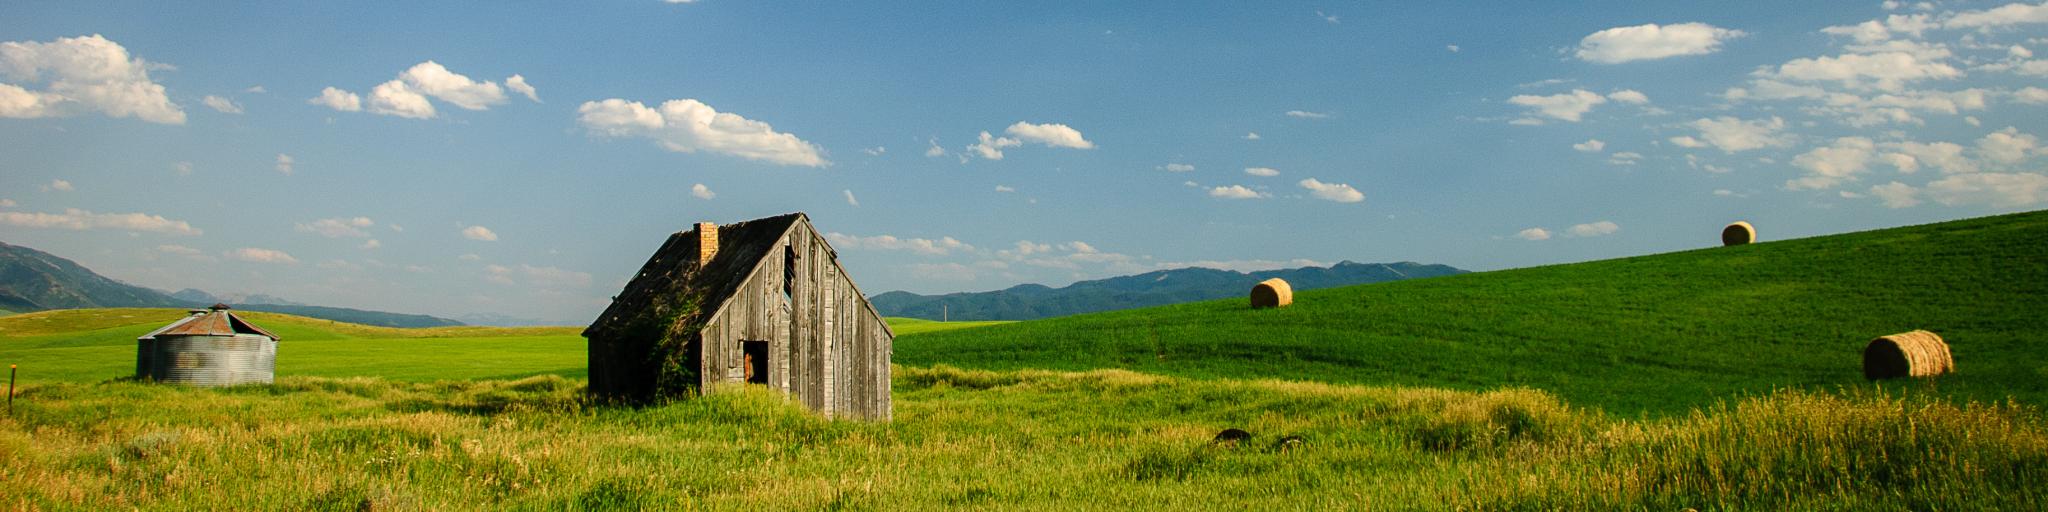 A small house sits in a green field in Swan Valley, Idaho, with a blue sky above